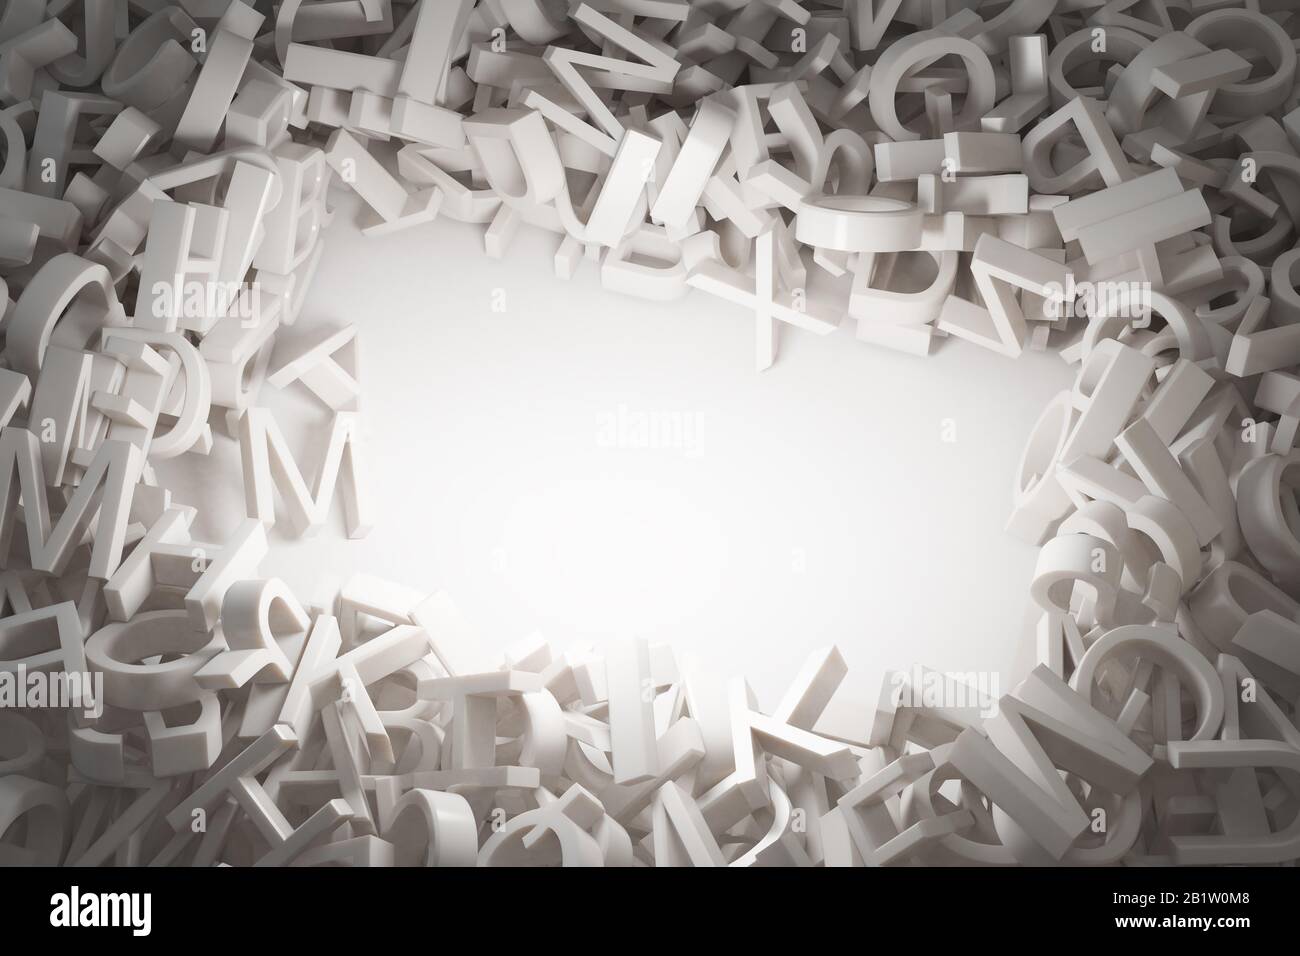 Random letters abstract 3D illustration Stock Photo